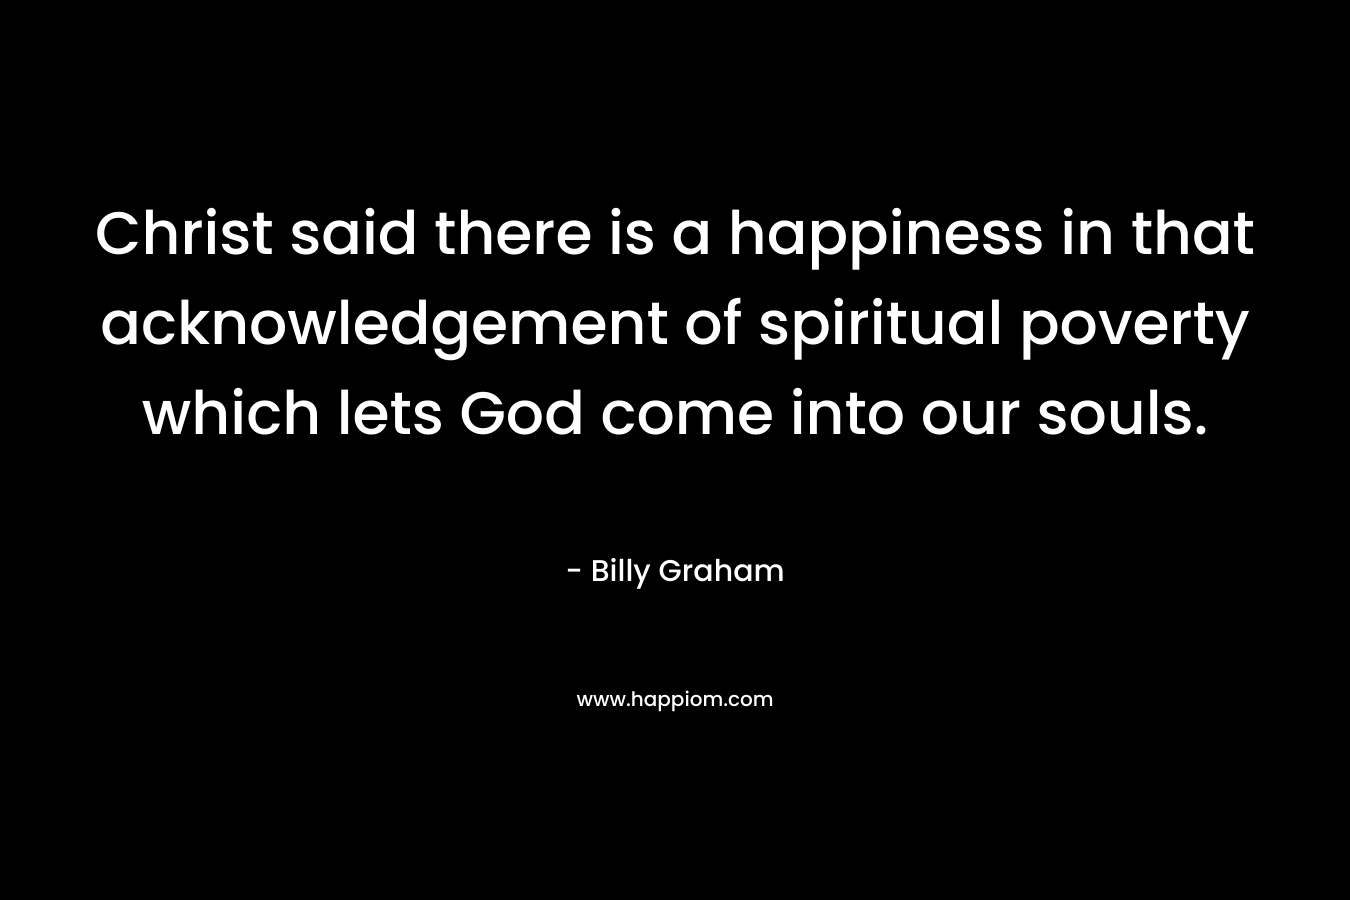 Christ said there is a happiness in that acknowledgement of spiritual poverty which lets God come into our souls.